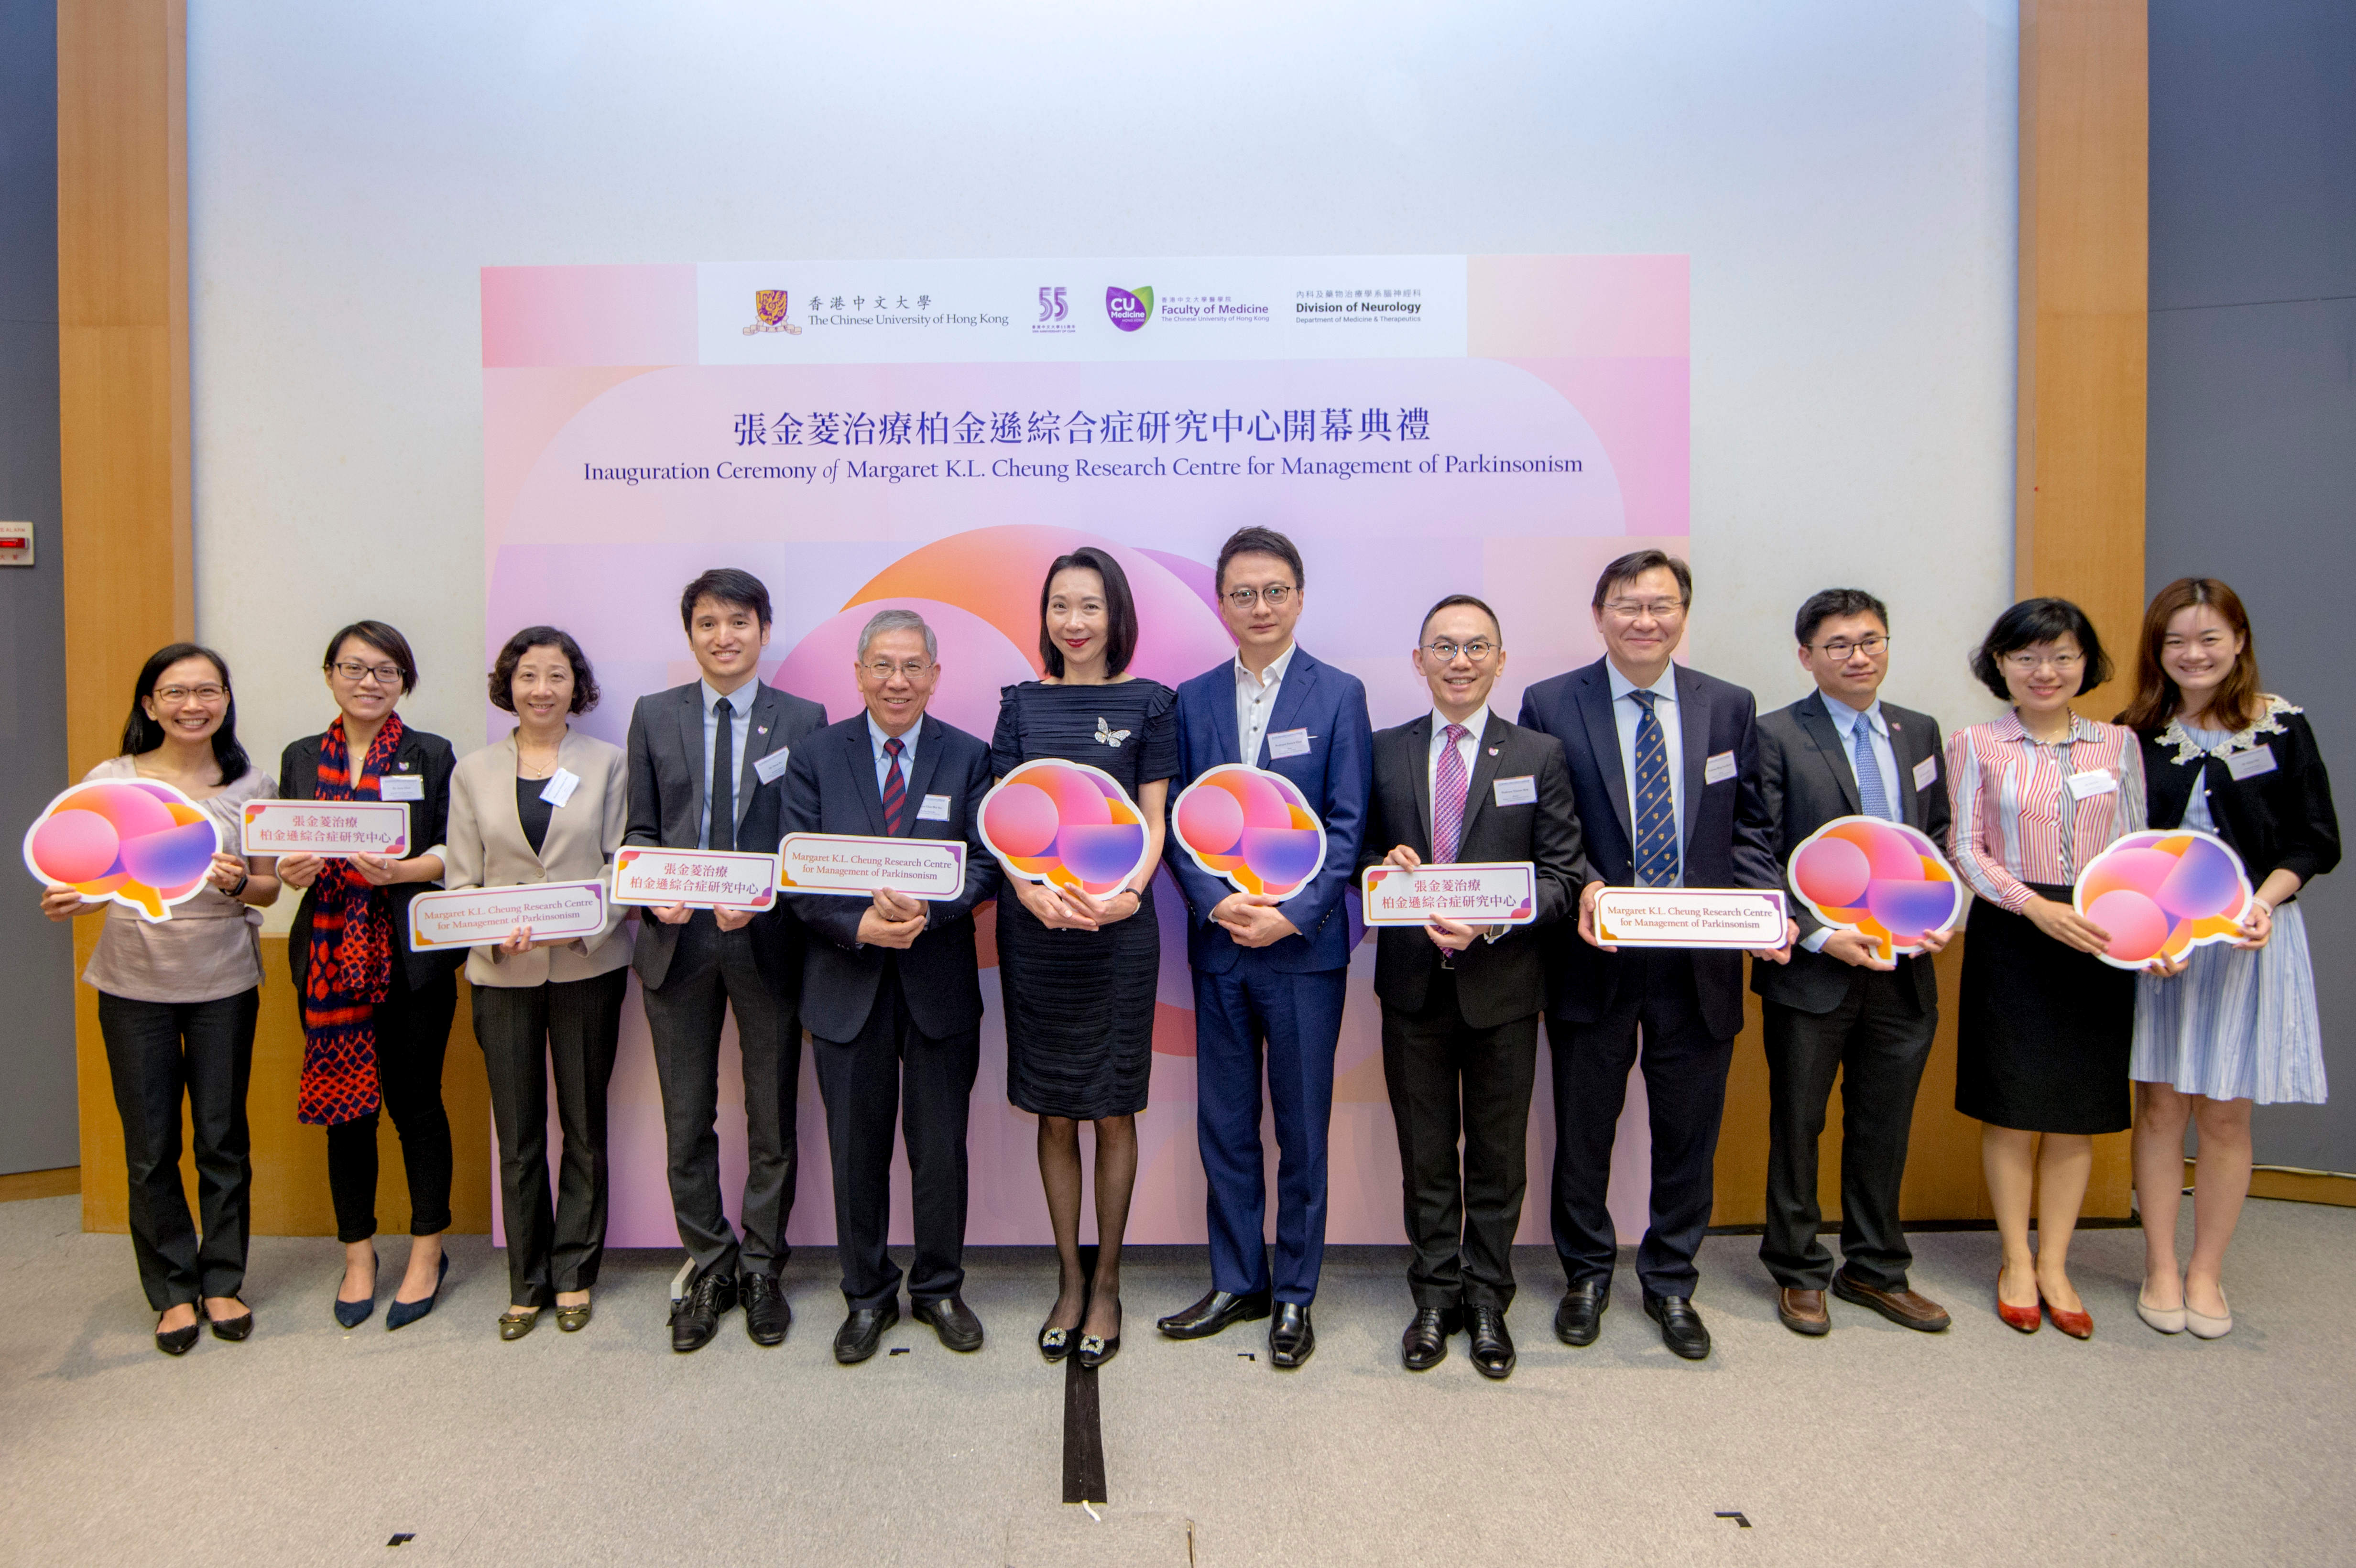 With a generous donation from Ms. Margaret Kam Ling CHEUNG, the Faculty of Medicine at CUHK sets up the Margaret K.L. Cheung Research Centre for Management of Parkinsonism on the World Parkinson’s Day (11 April).